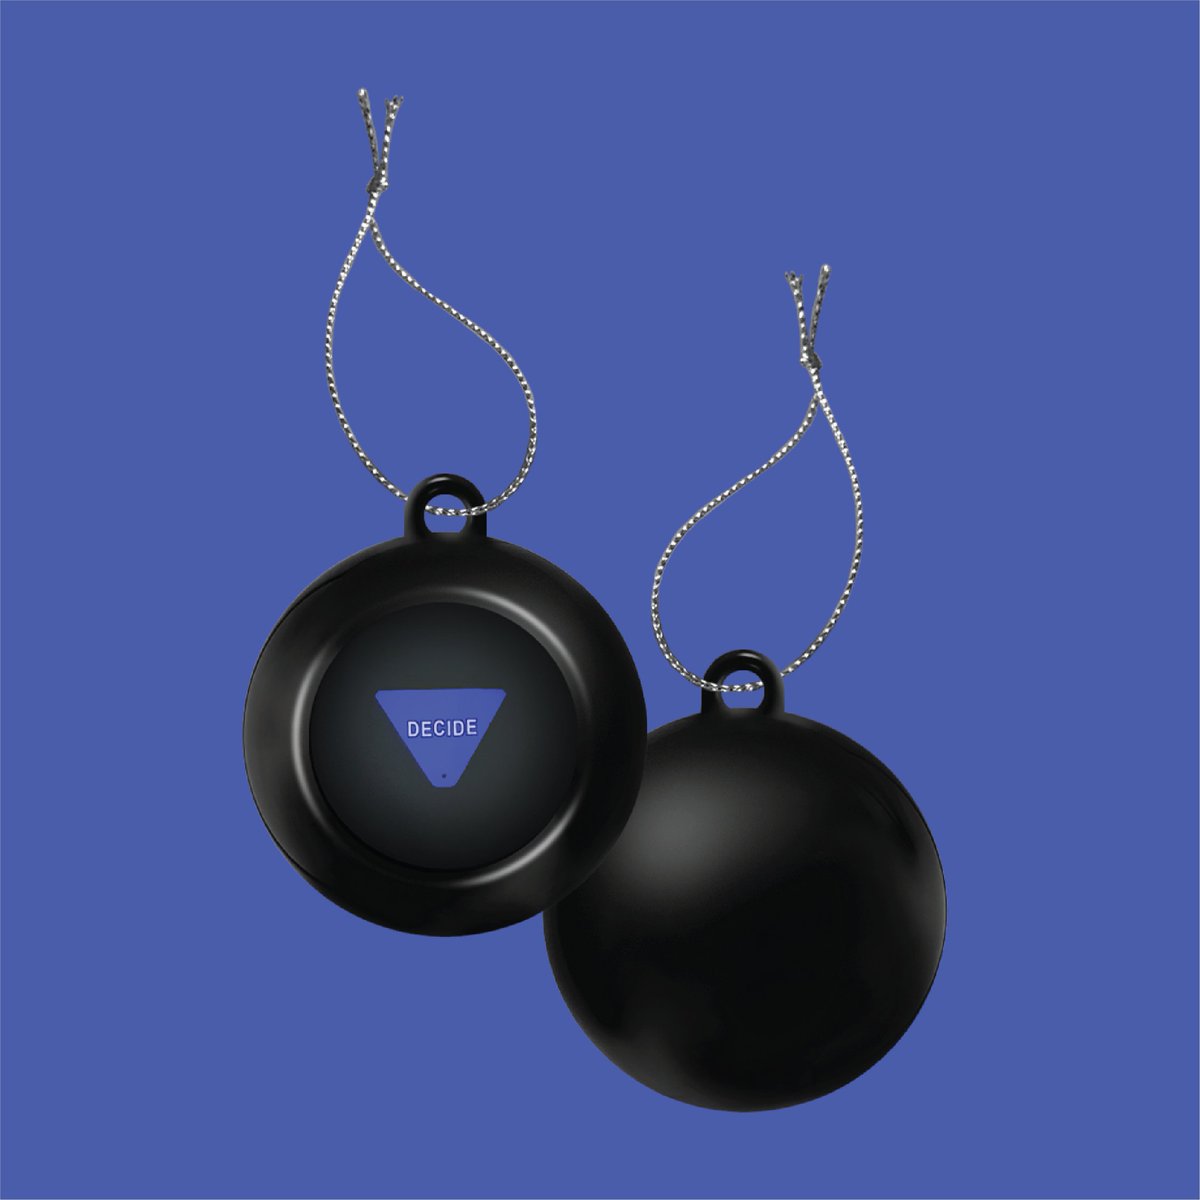 CHECK OUT THIS CUSTOM 8-BALL ORNAMENT: thecbpstore.com/collections/dj…